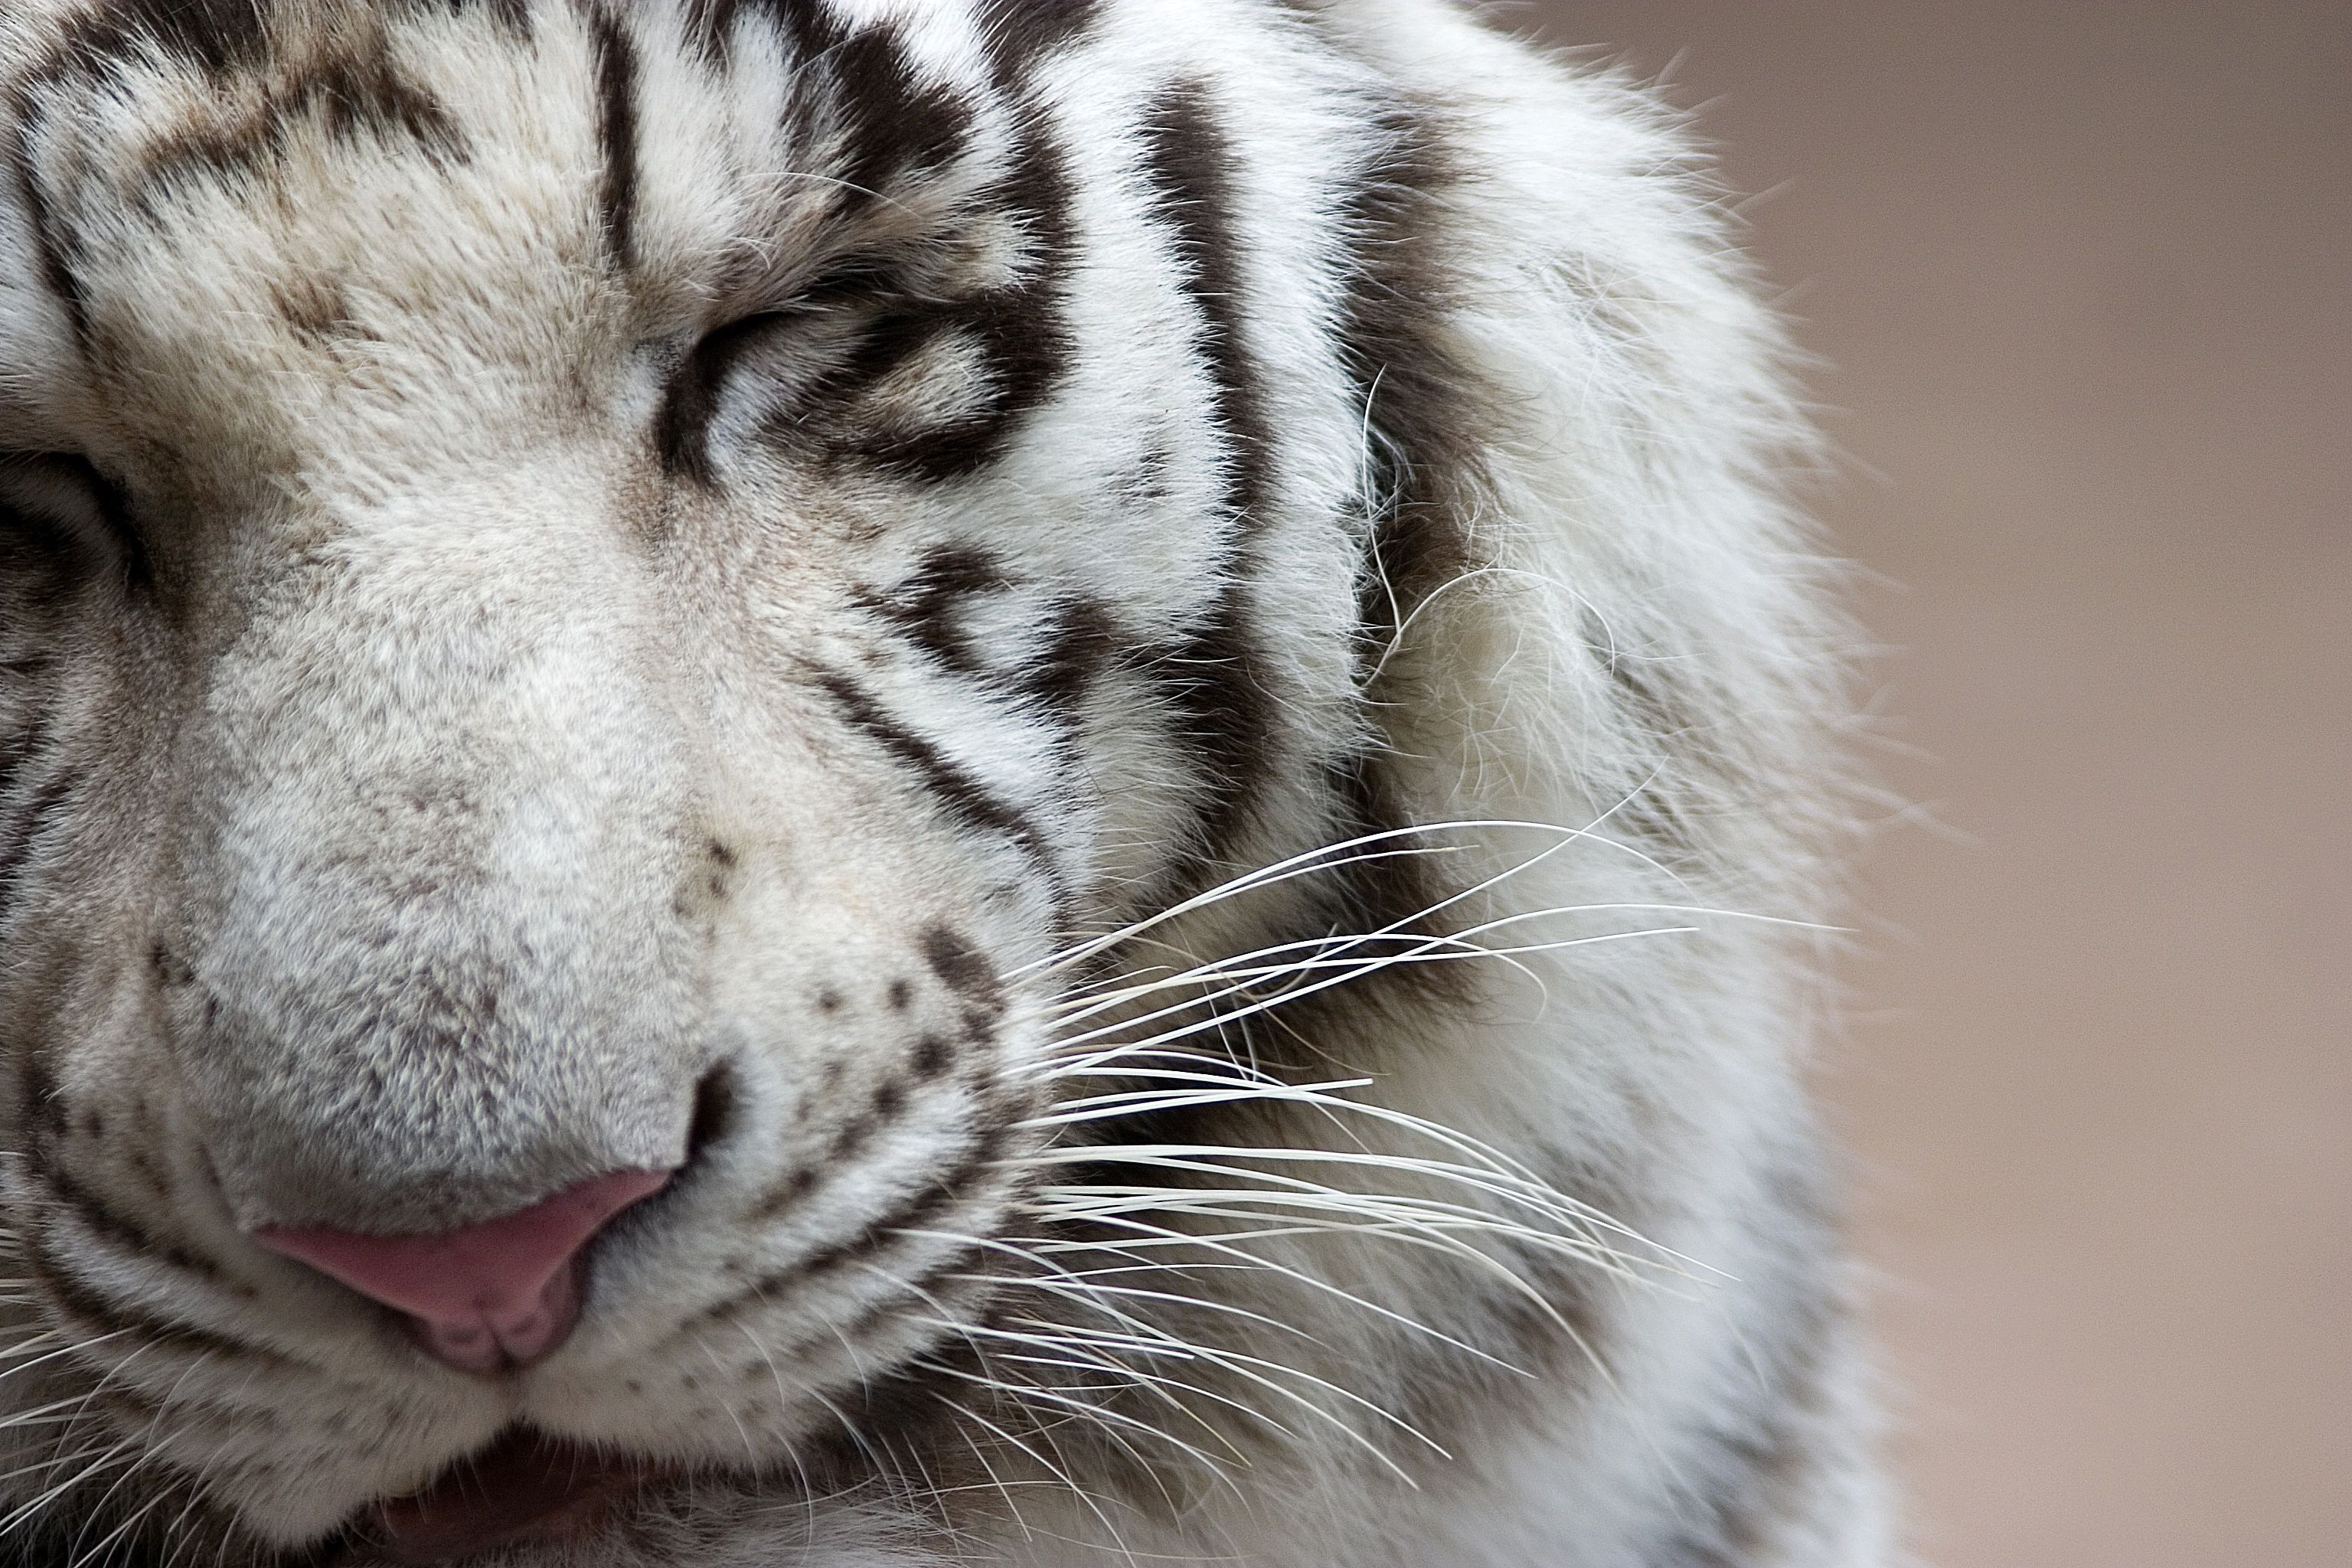 3072x2048 White Tiger Computer Wallpapers, Desktop Backgrounds | | ID:376075 | White tiger, Tiger, Animals